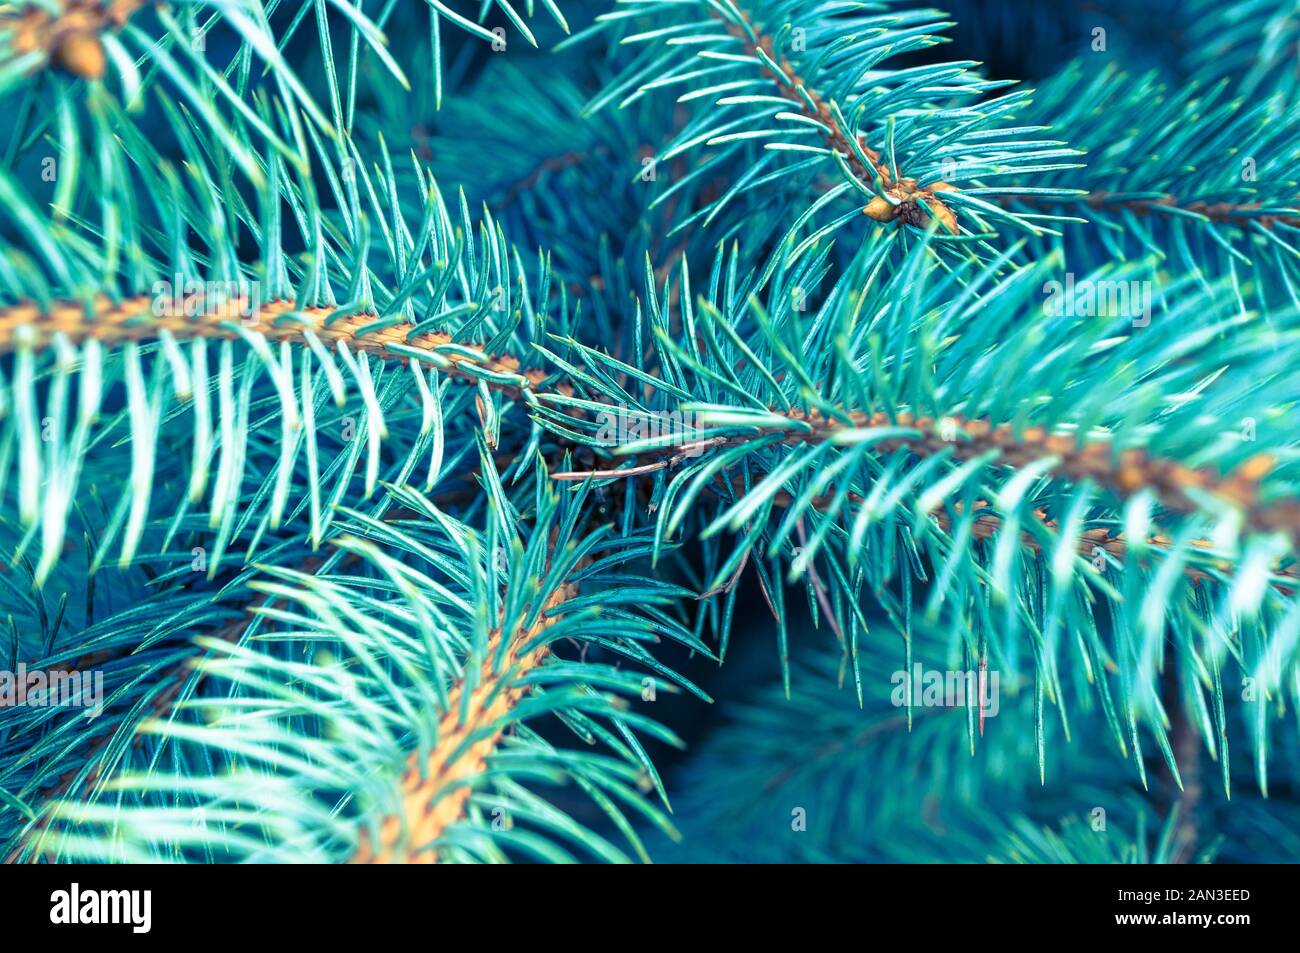 Branches of blue spruce (Picea pungens) close up. Soft focus, shallow depth of field. Stock Photo